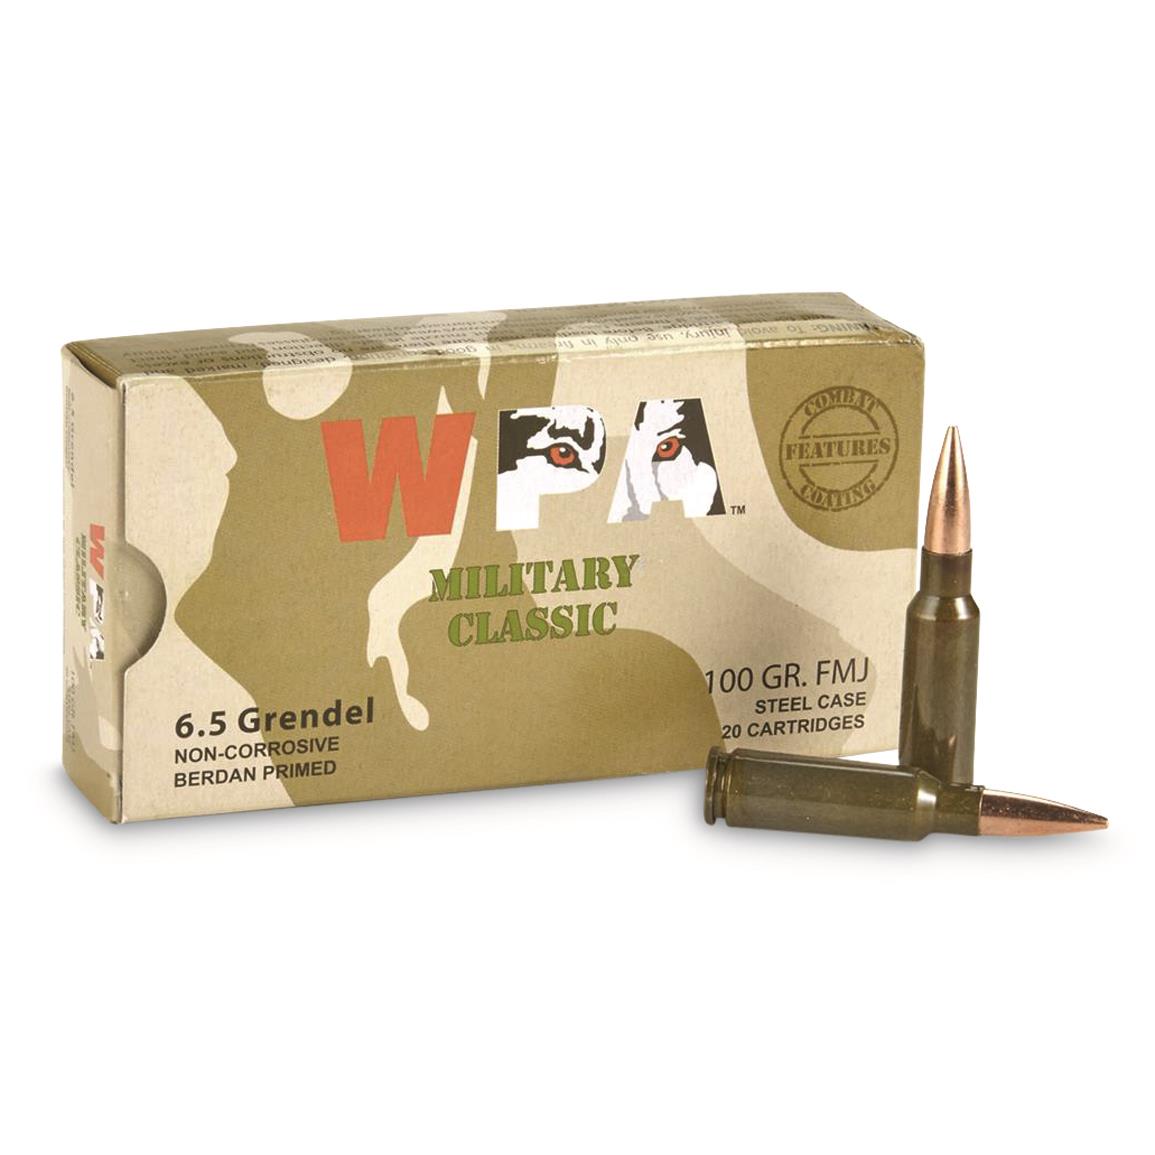 Wolf WPA Military Classic, 6.5 Grendel, FMJ, 100 Grain, 20 Rounds